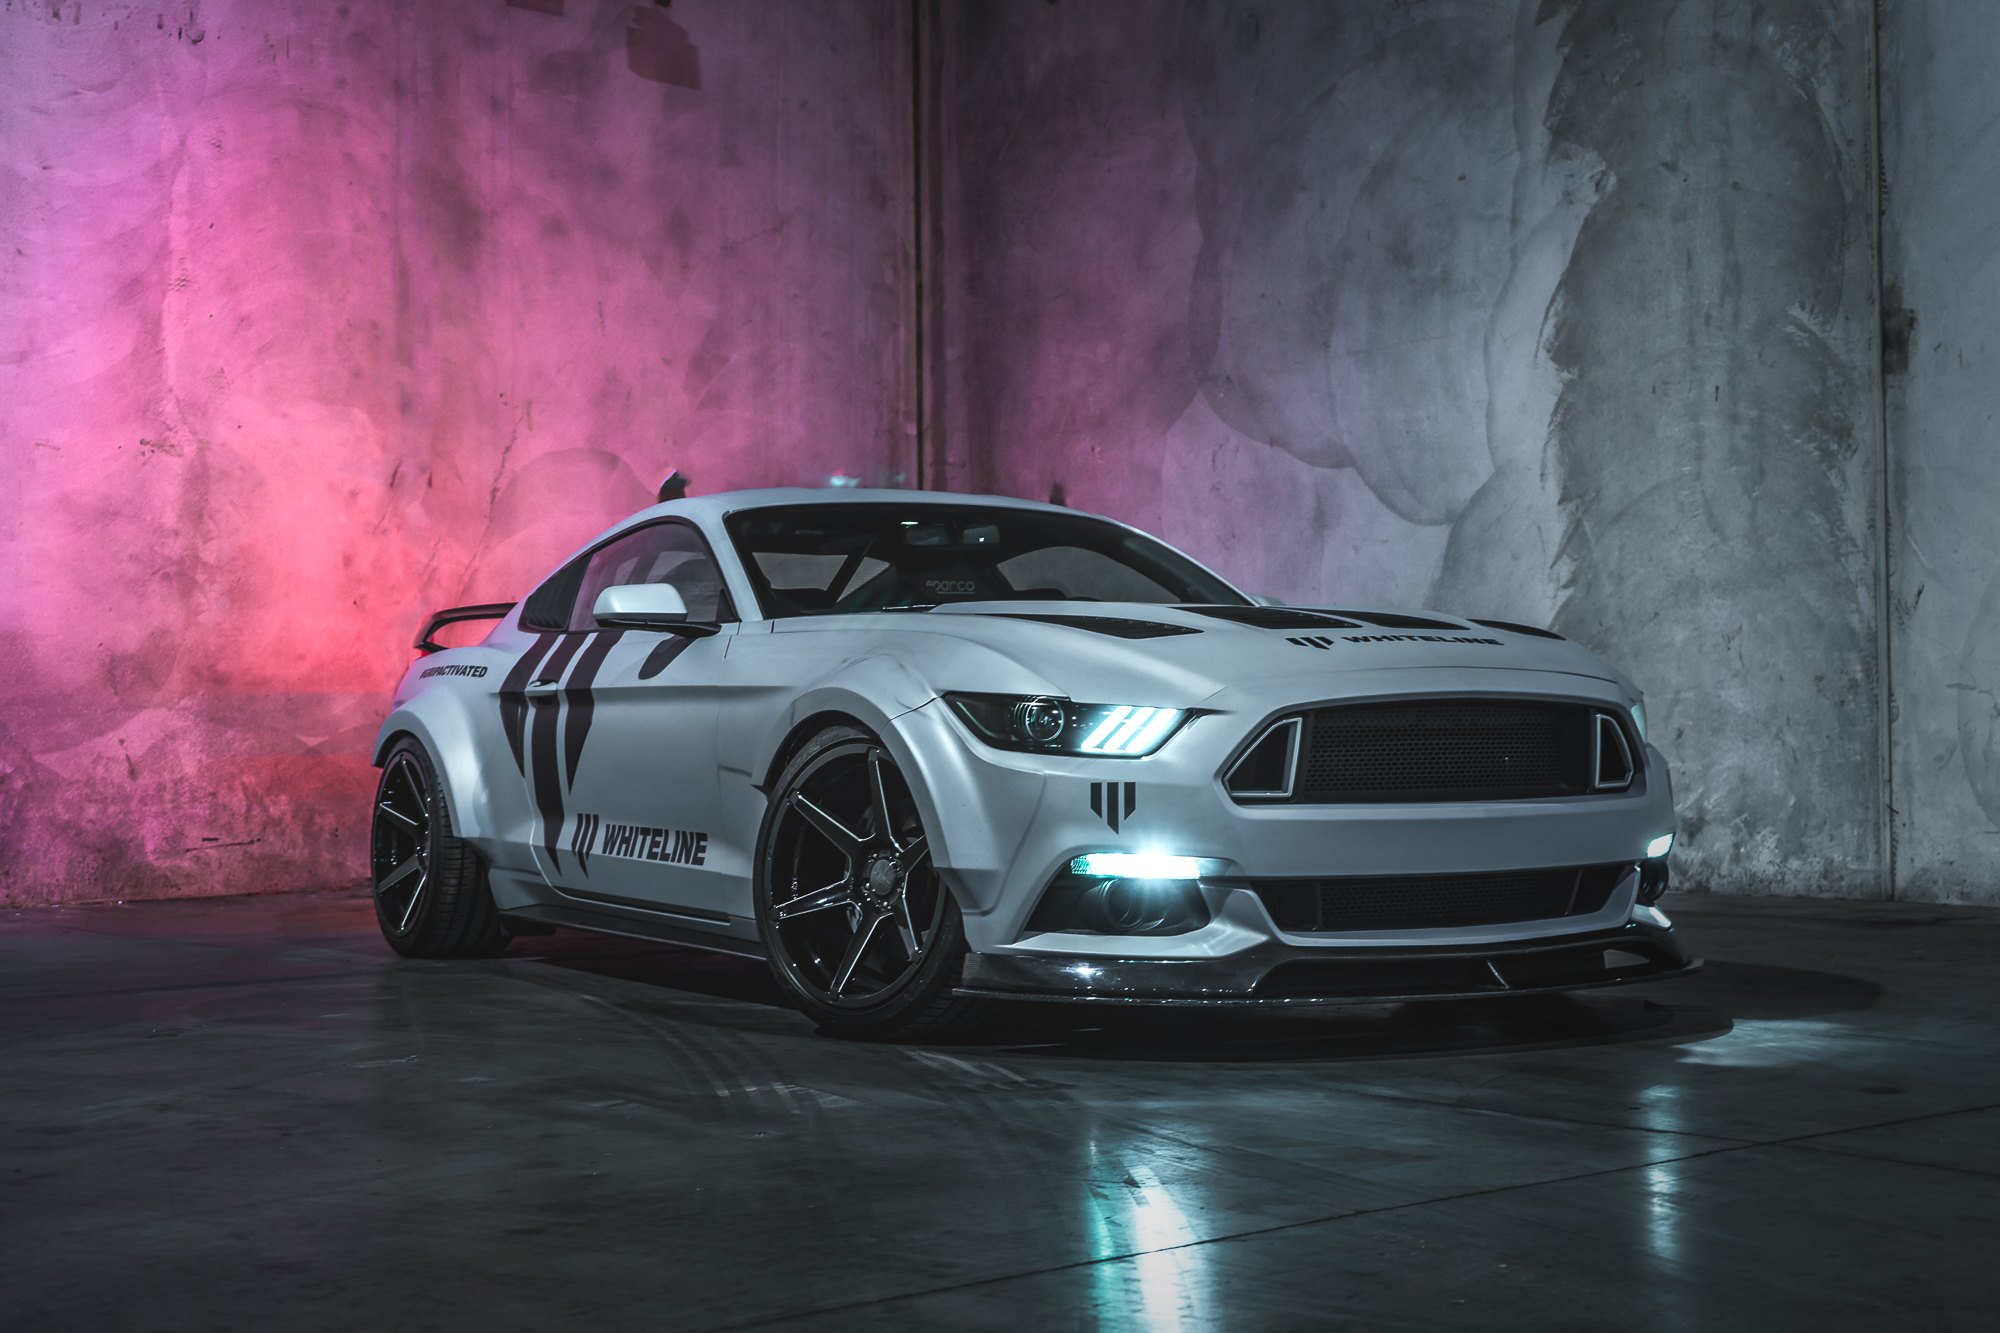 Aftermarket Body Kit on Gray Ford Mustang - Photo by Ace Alloy Wheels